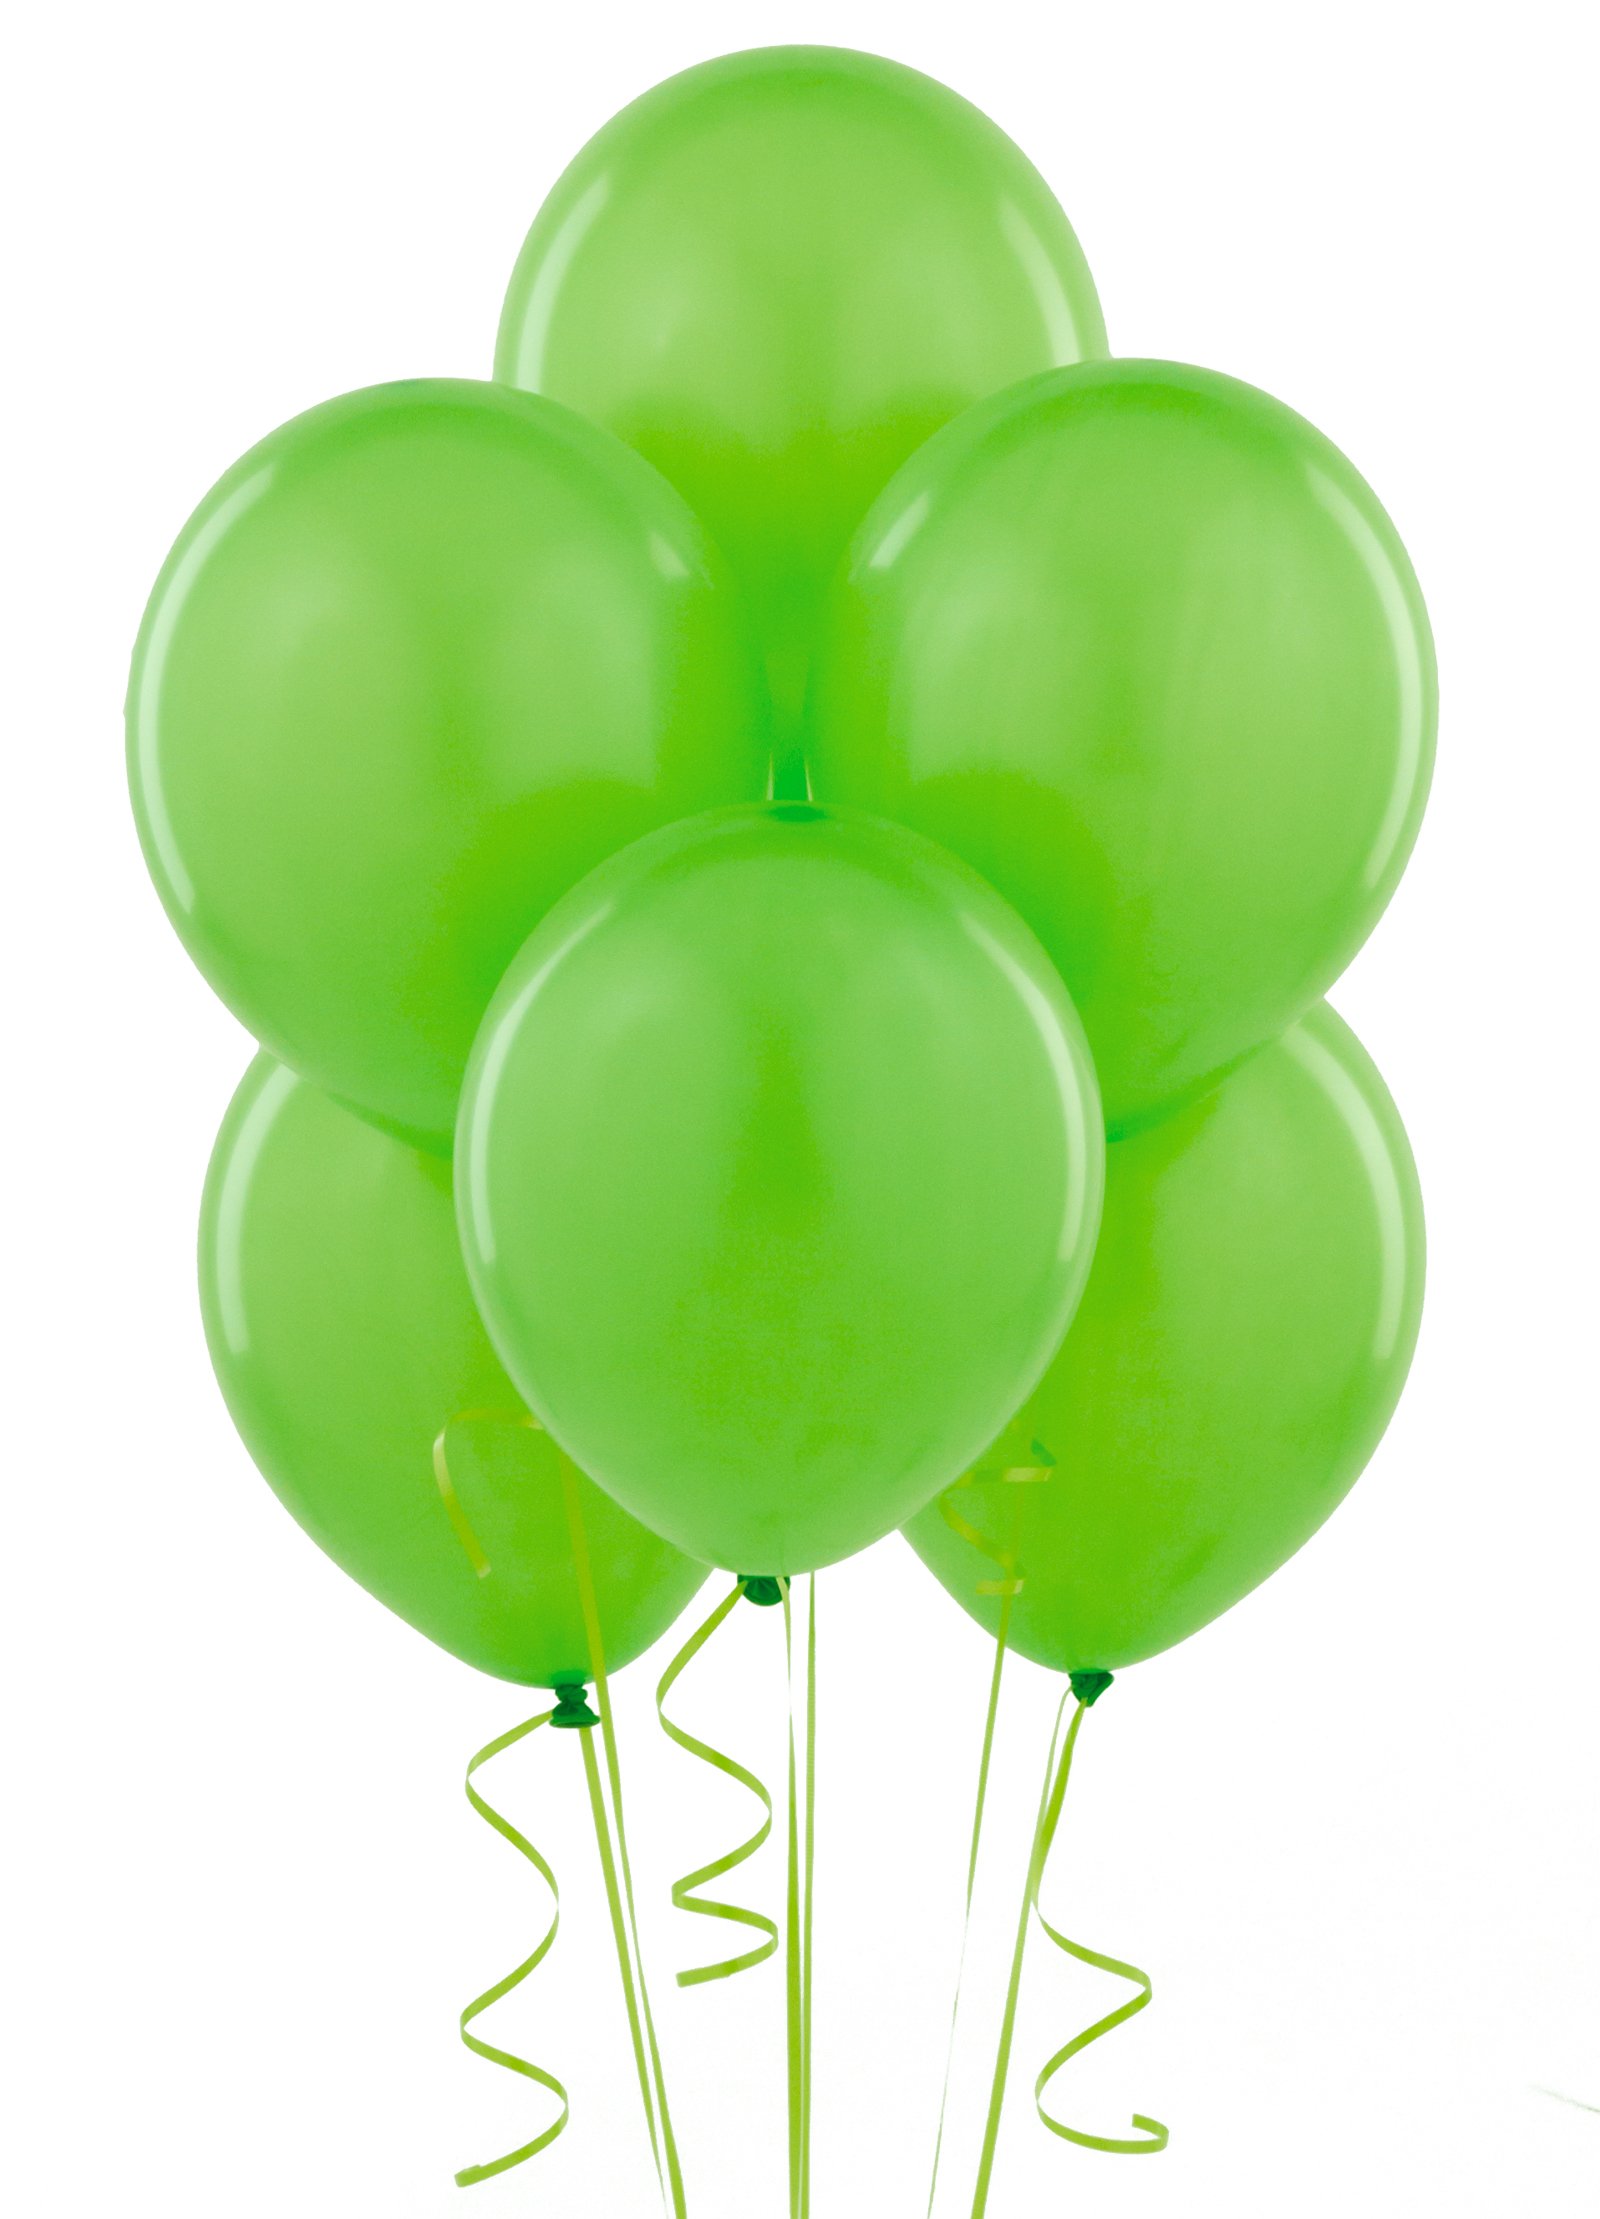 Green Balloons (6 count)